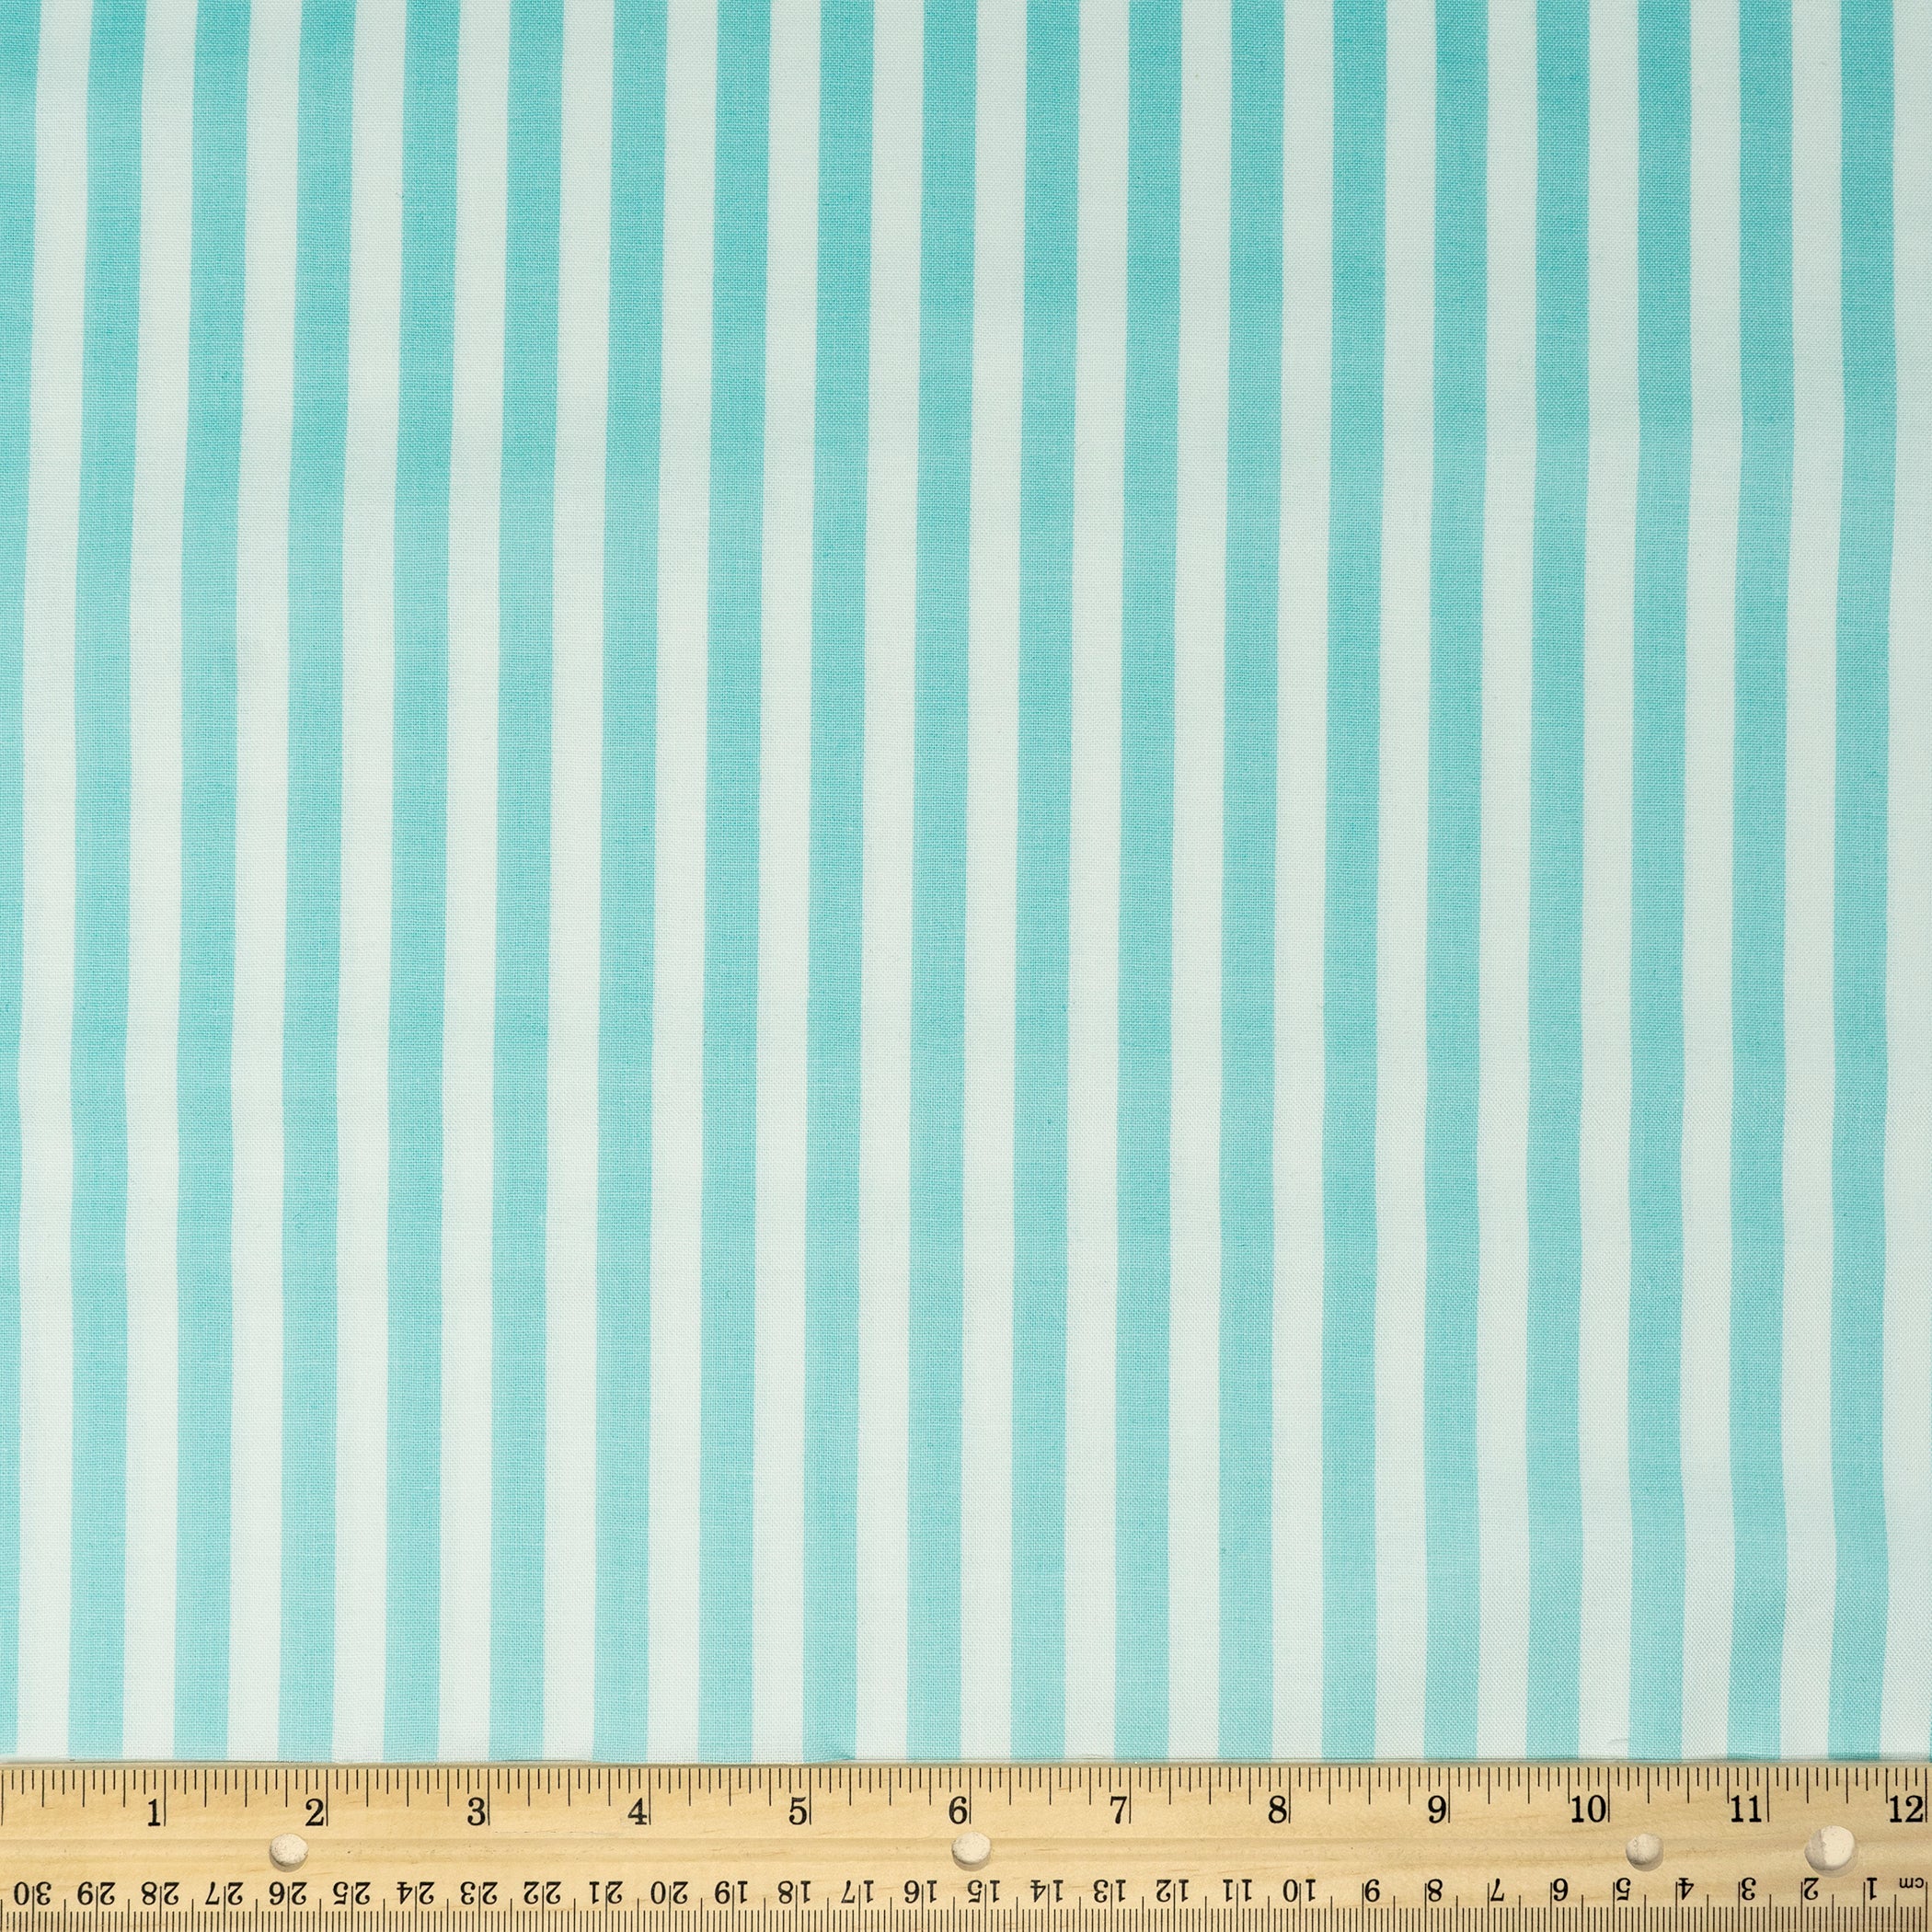 Waverly Inspirations Cotton 44" Stripes Glacier Color Sewing Fabric by the Yard